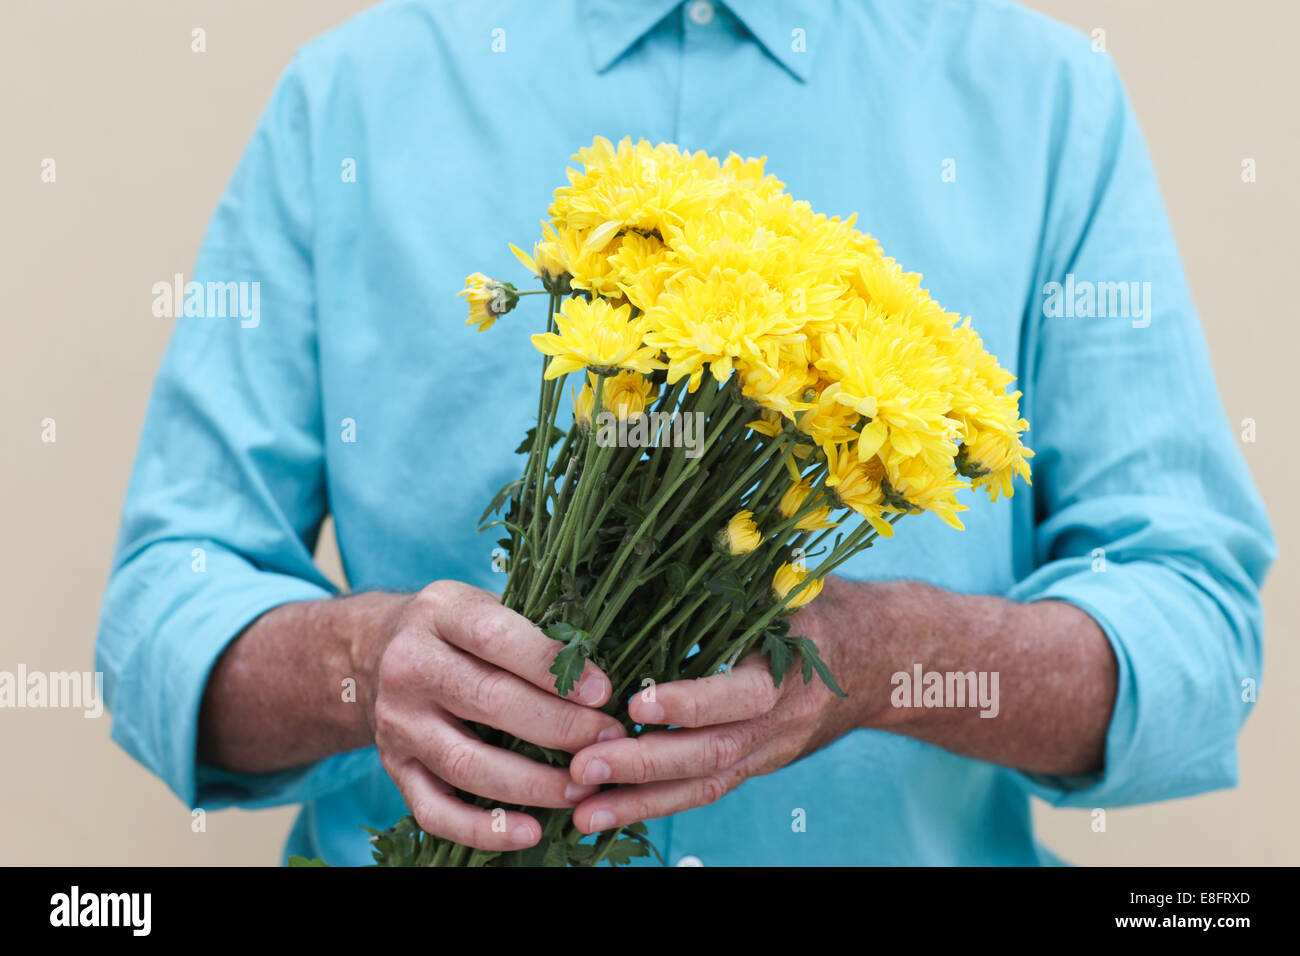 Man holding bunch of flowers Stock Photo